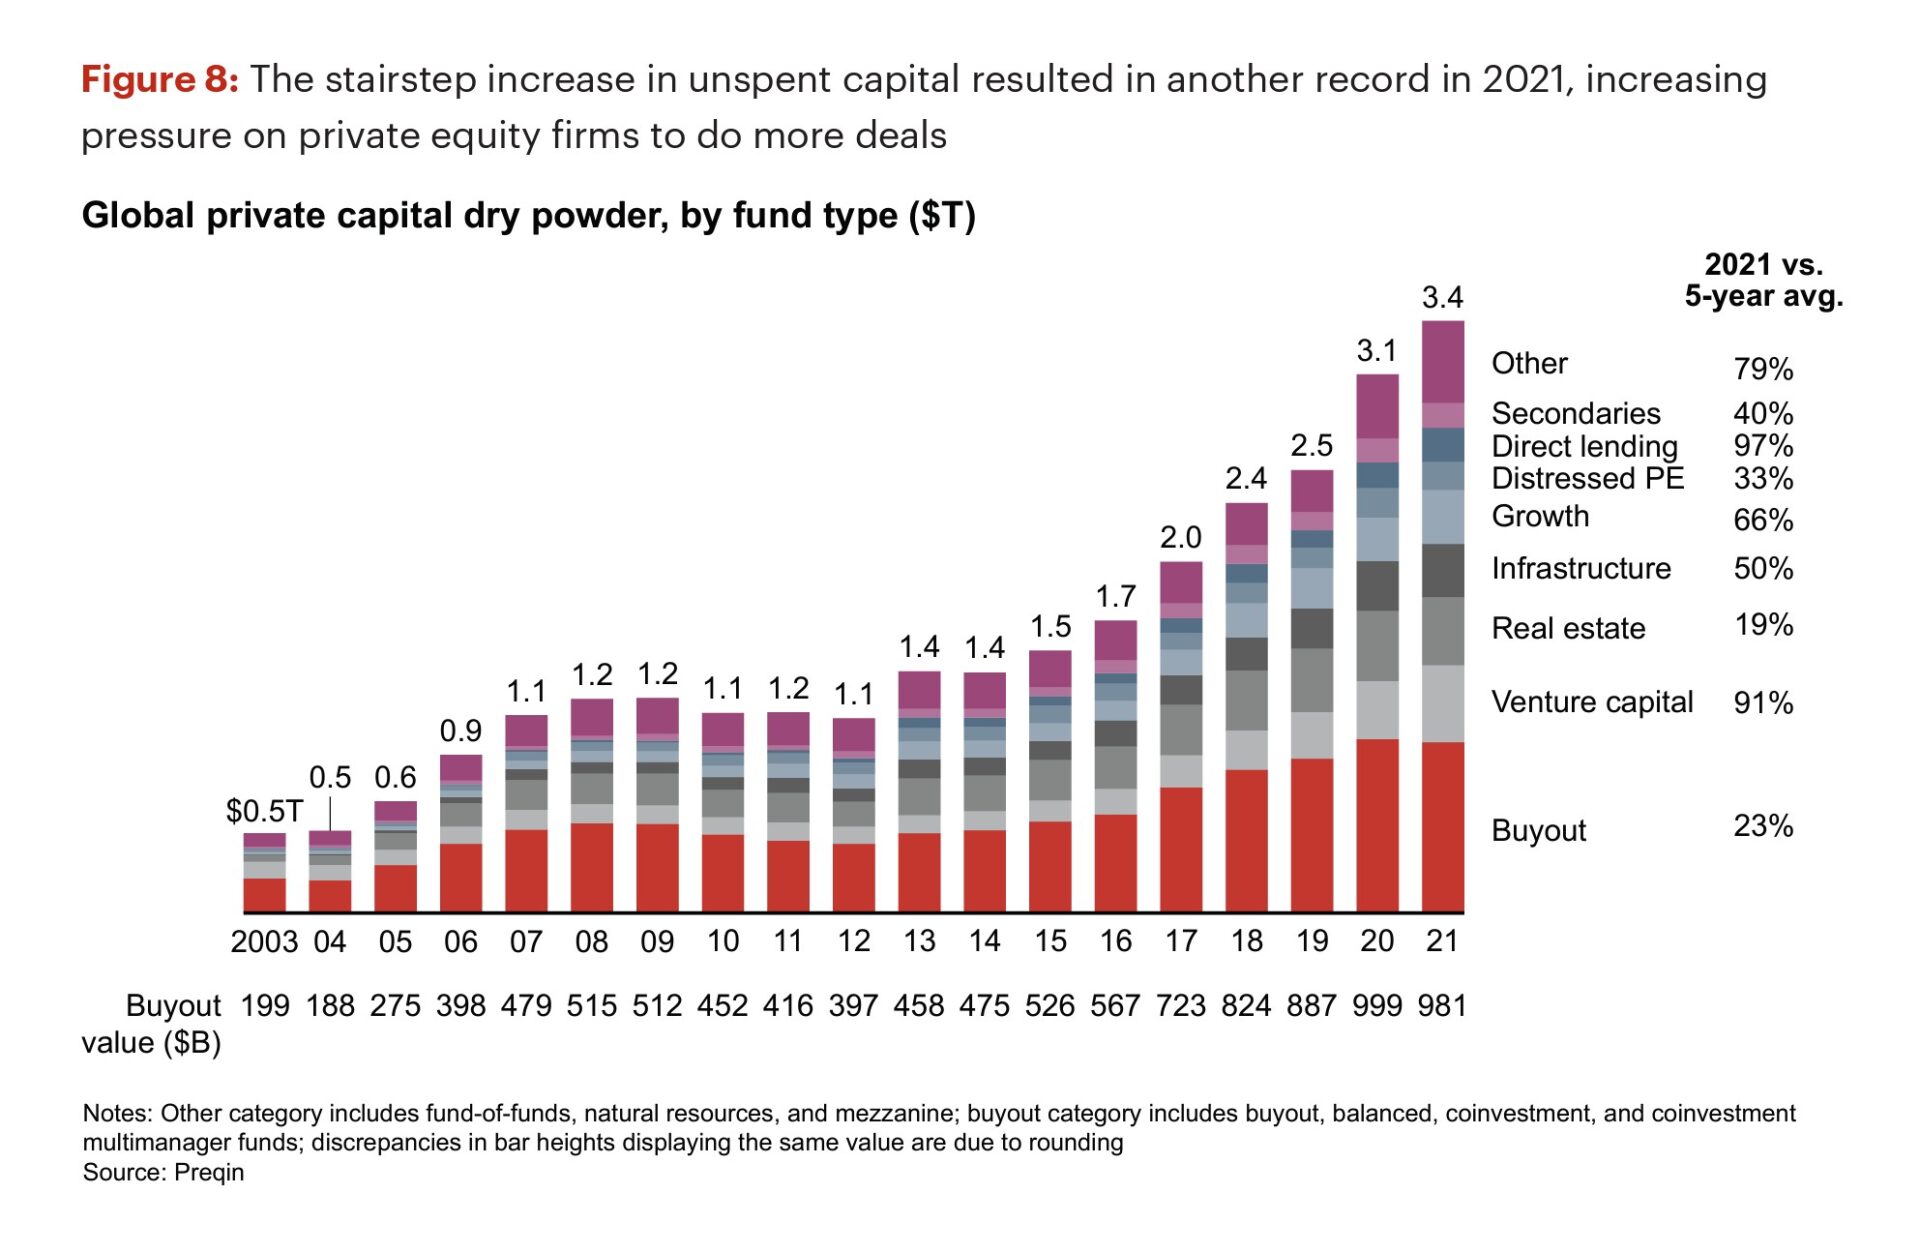 Global private capital dry powder, by fund type